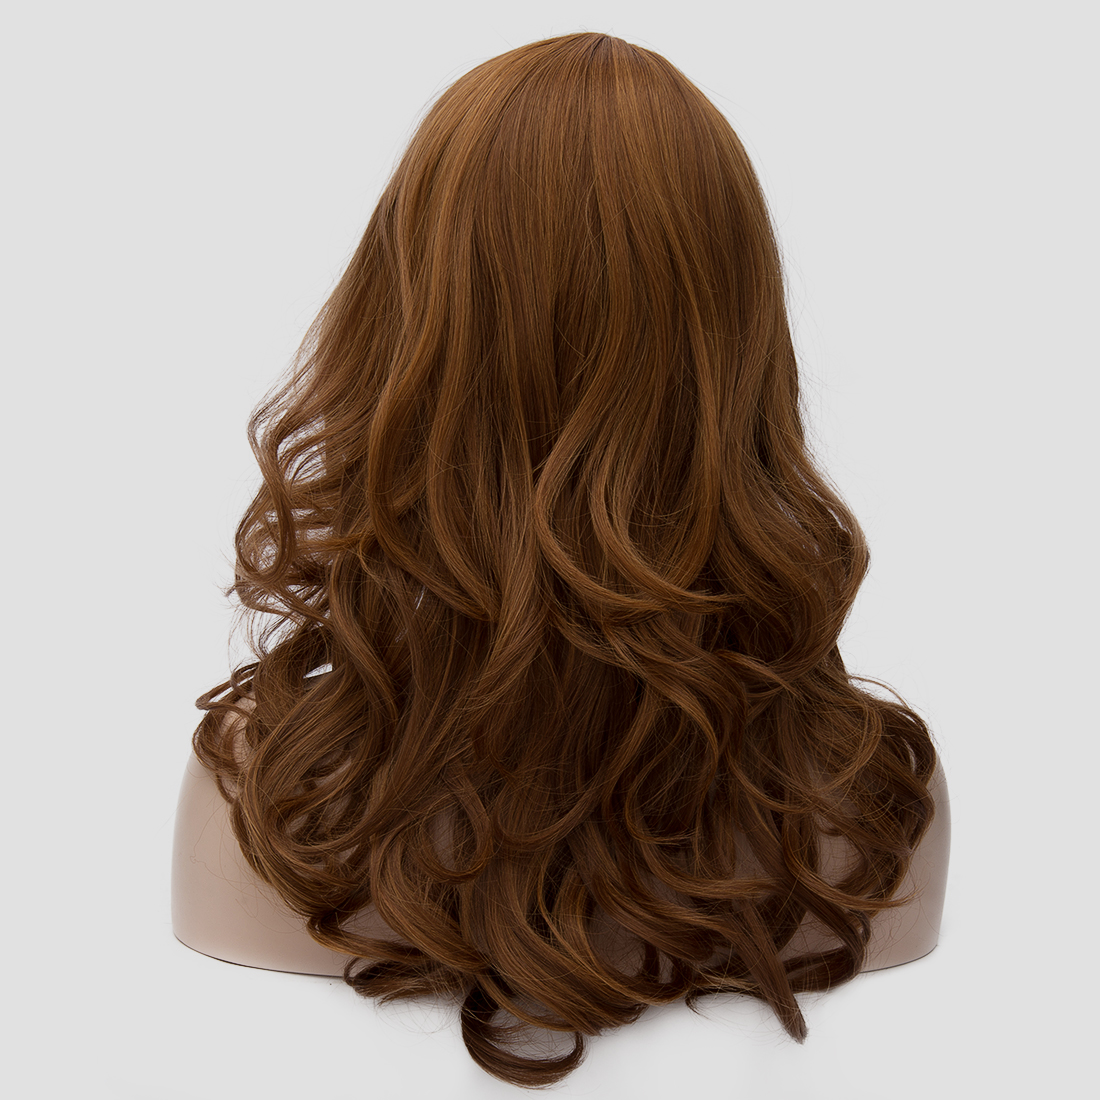 Clearance Sale Synthetic Wavy Hair Capless Women Wig 20 Inches